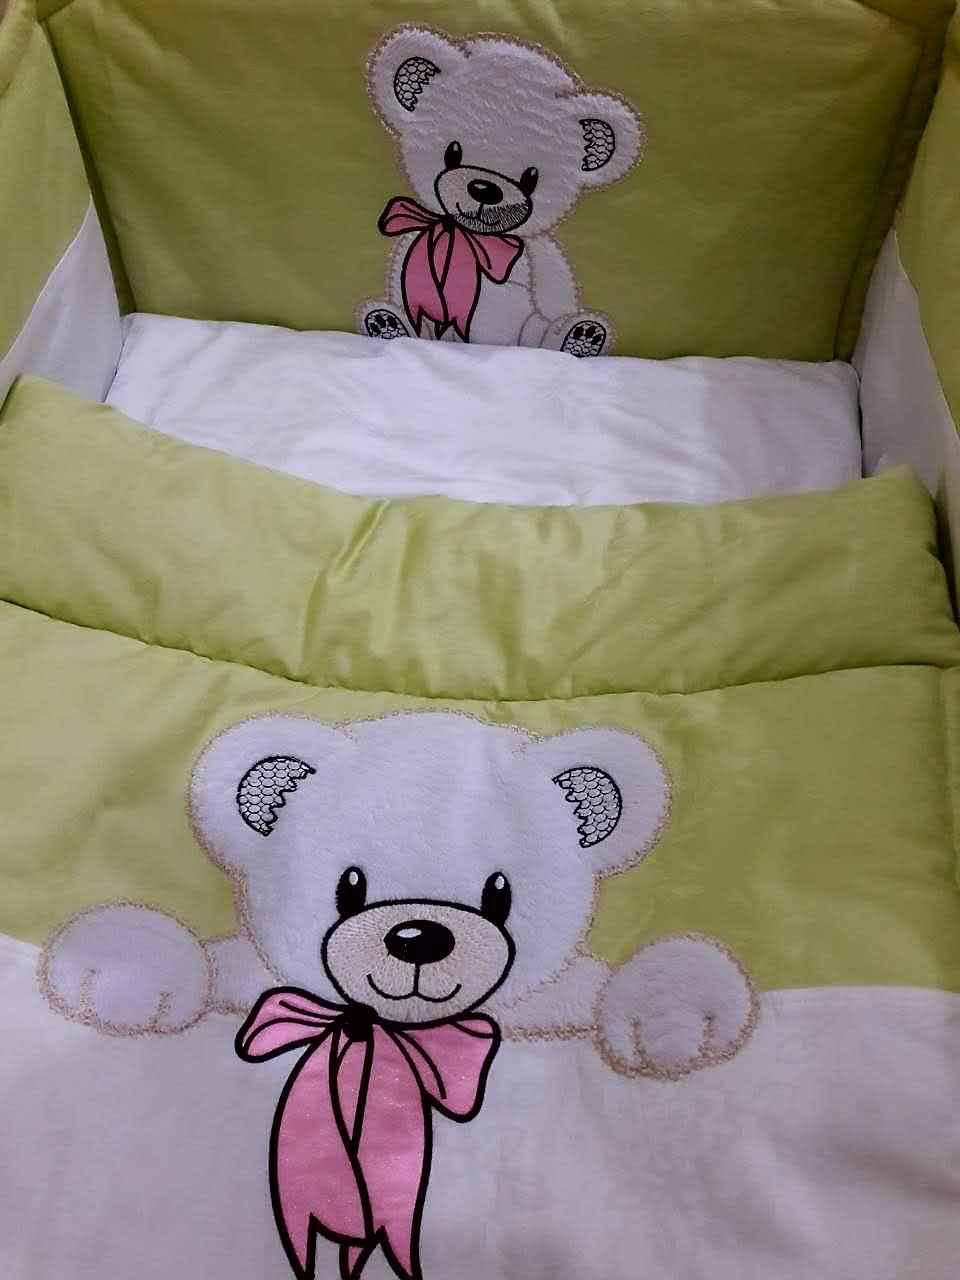 Bed linen with little bear free applique machine embroidery design